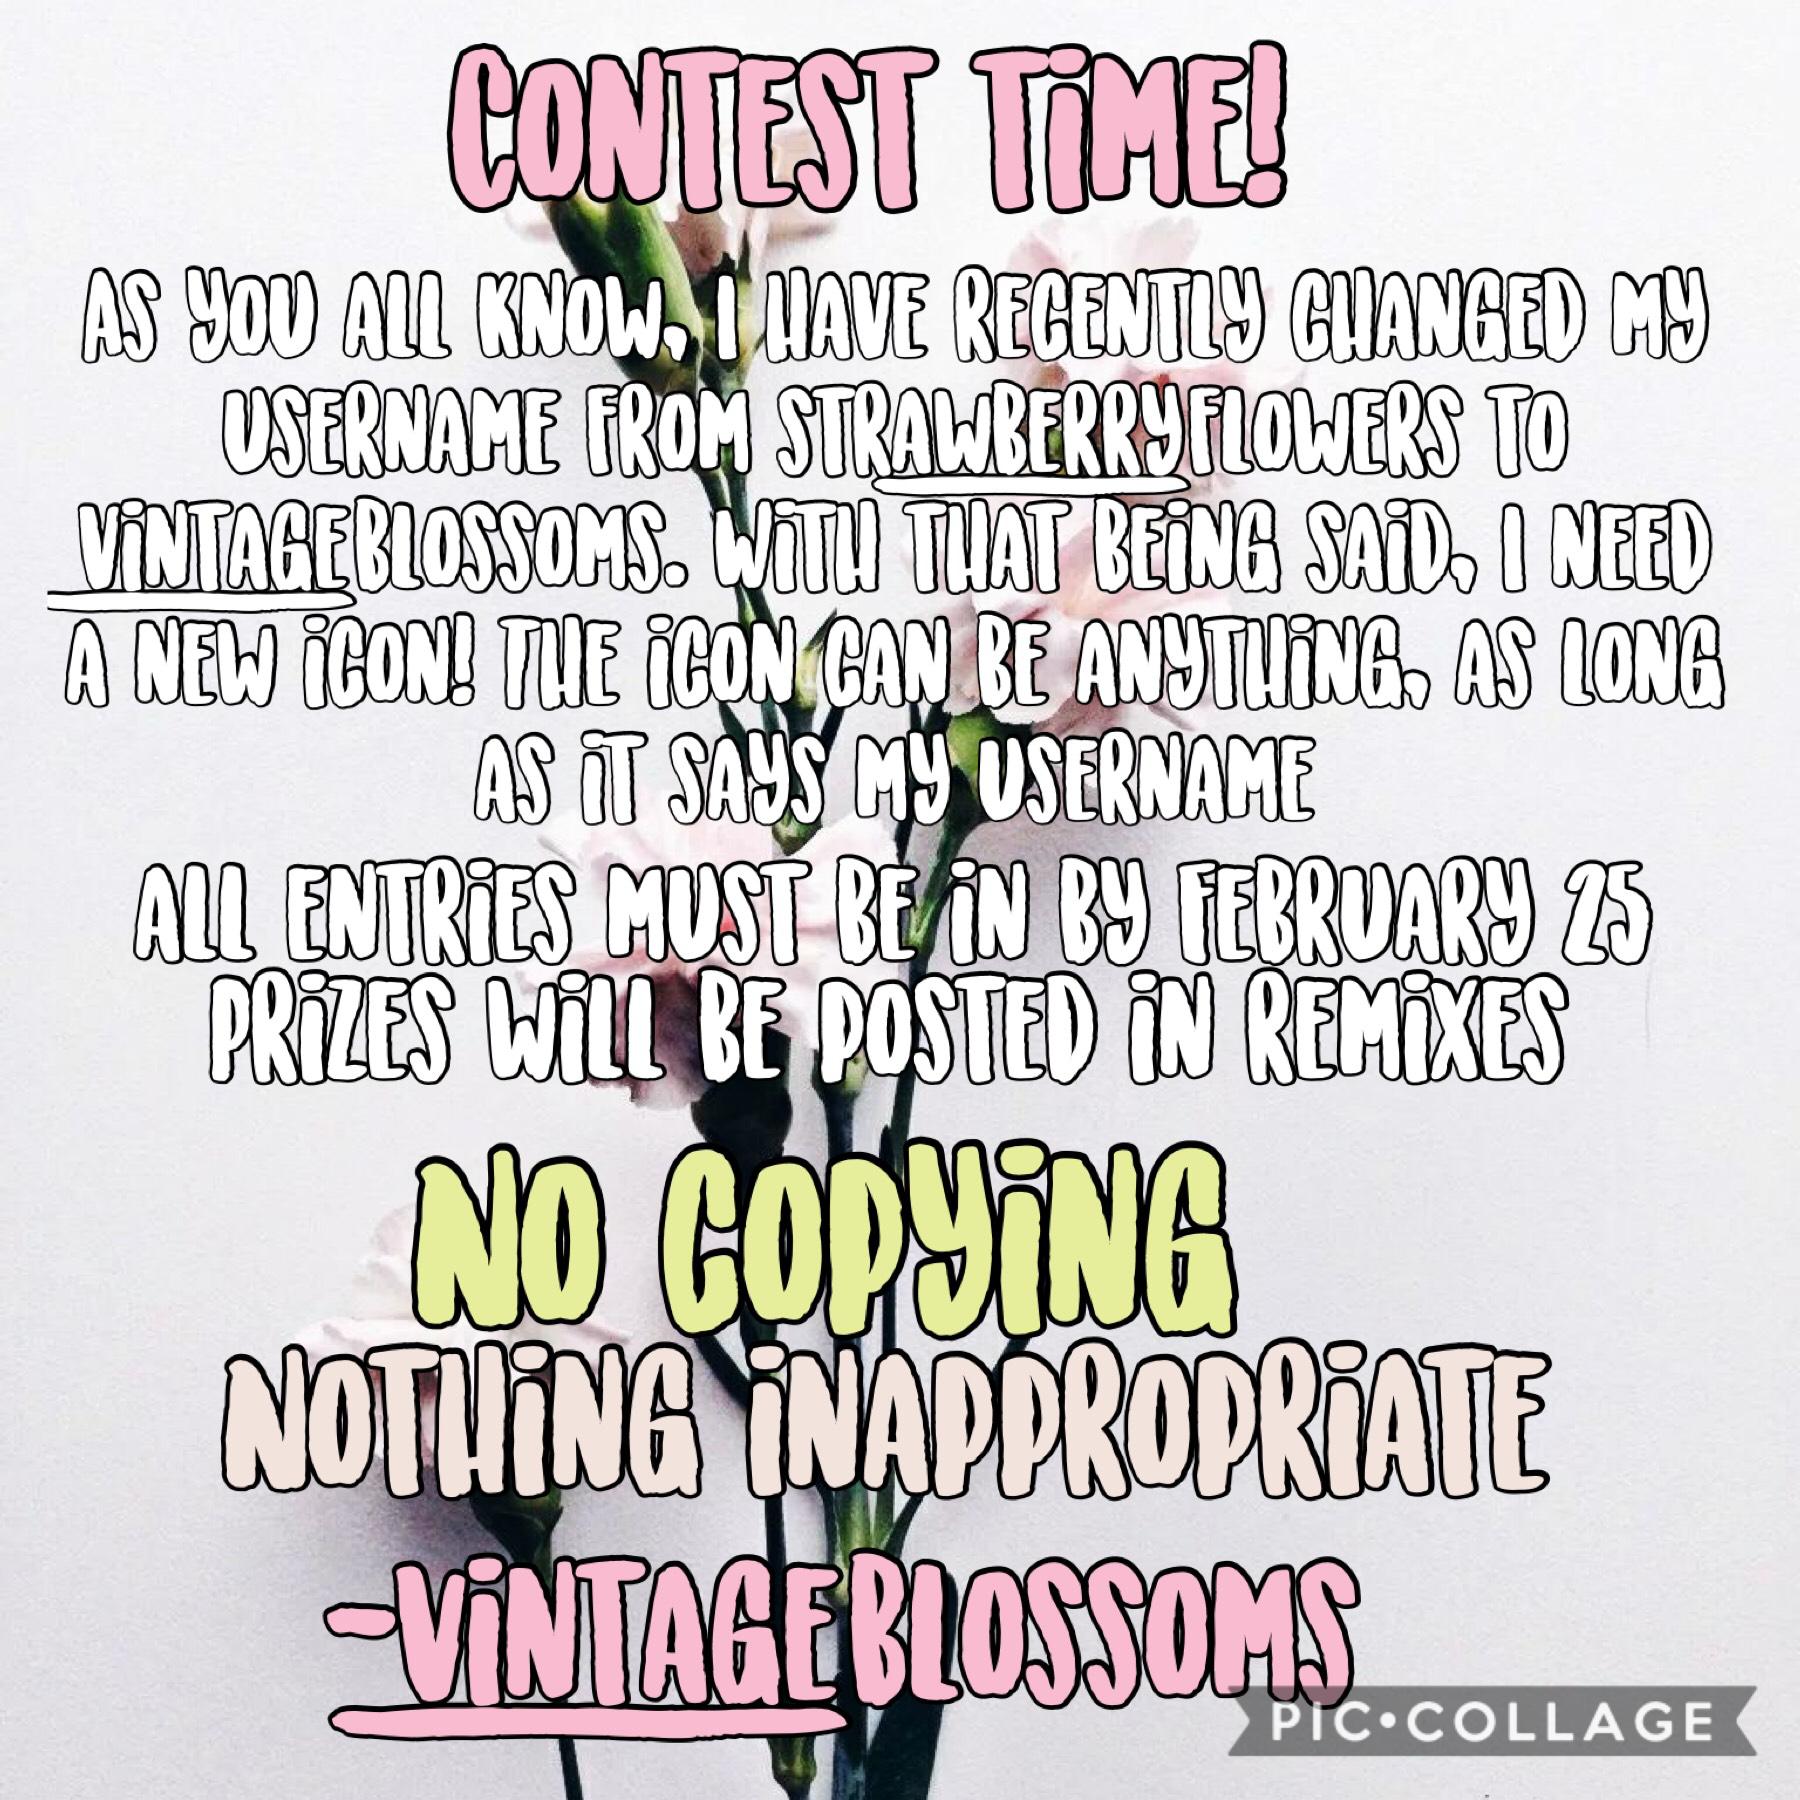 🌺🌸Please Enter for the chance to win awesome prizes🌸🌺